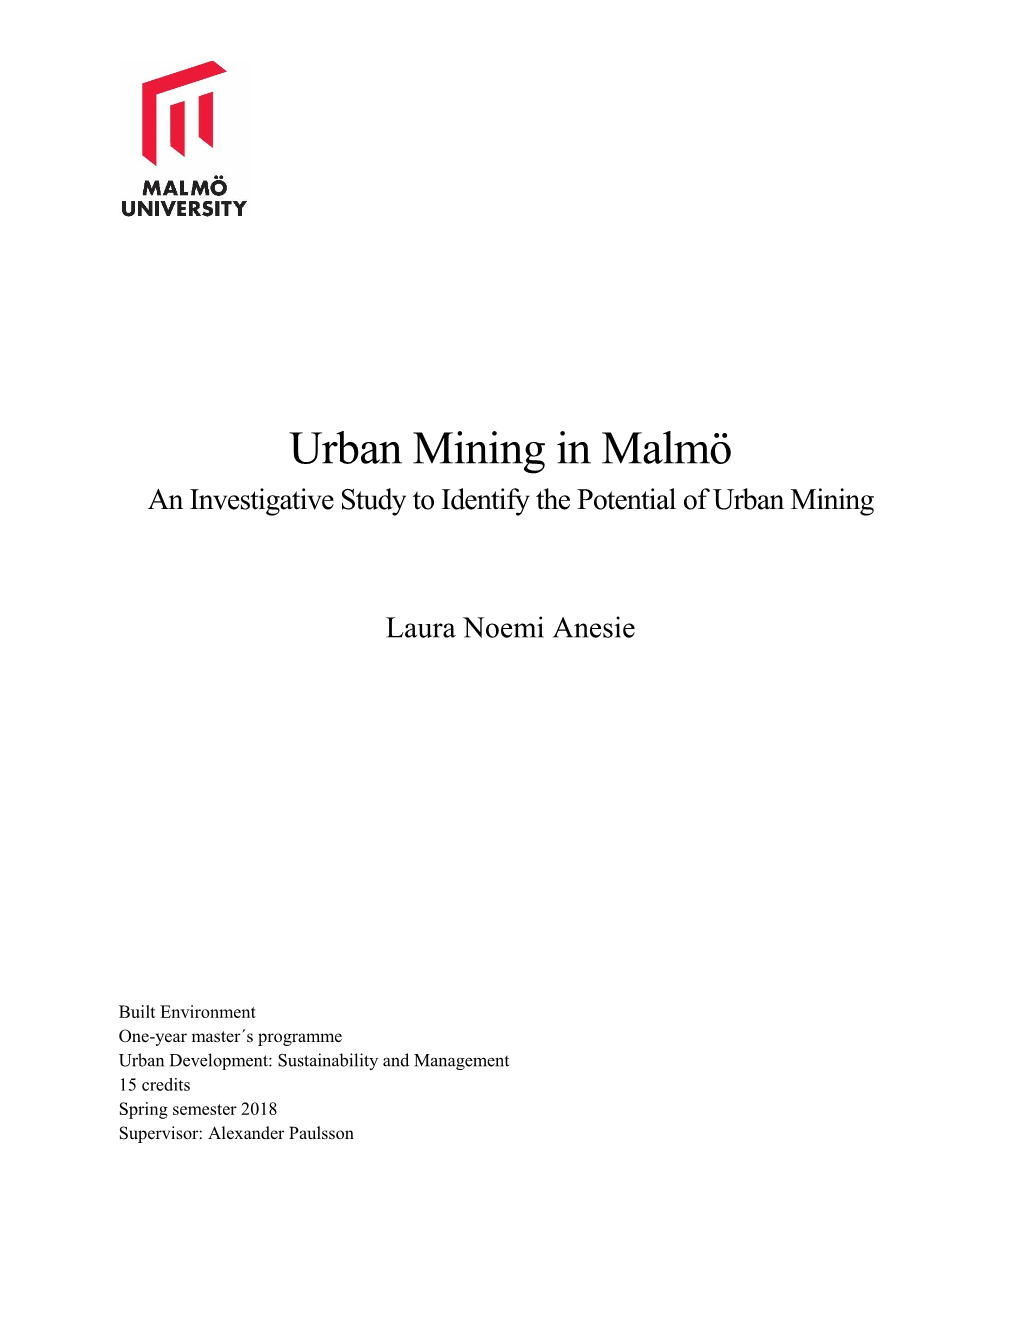 Urban Mining in Malmö an Investigative Study to Identify the Potential of Urban Mining